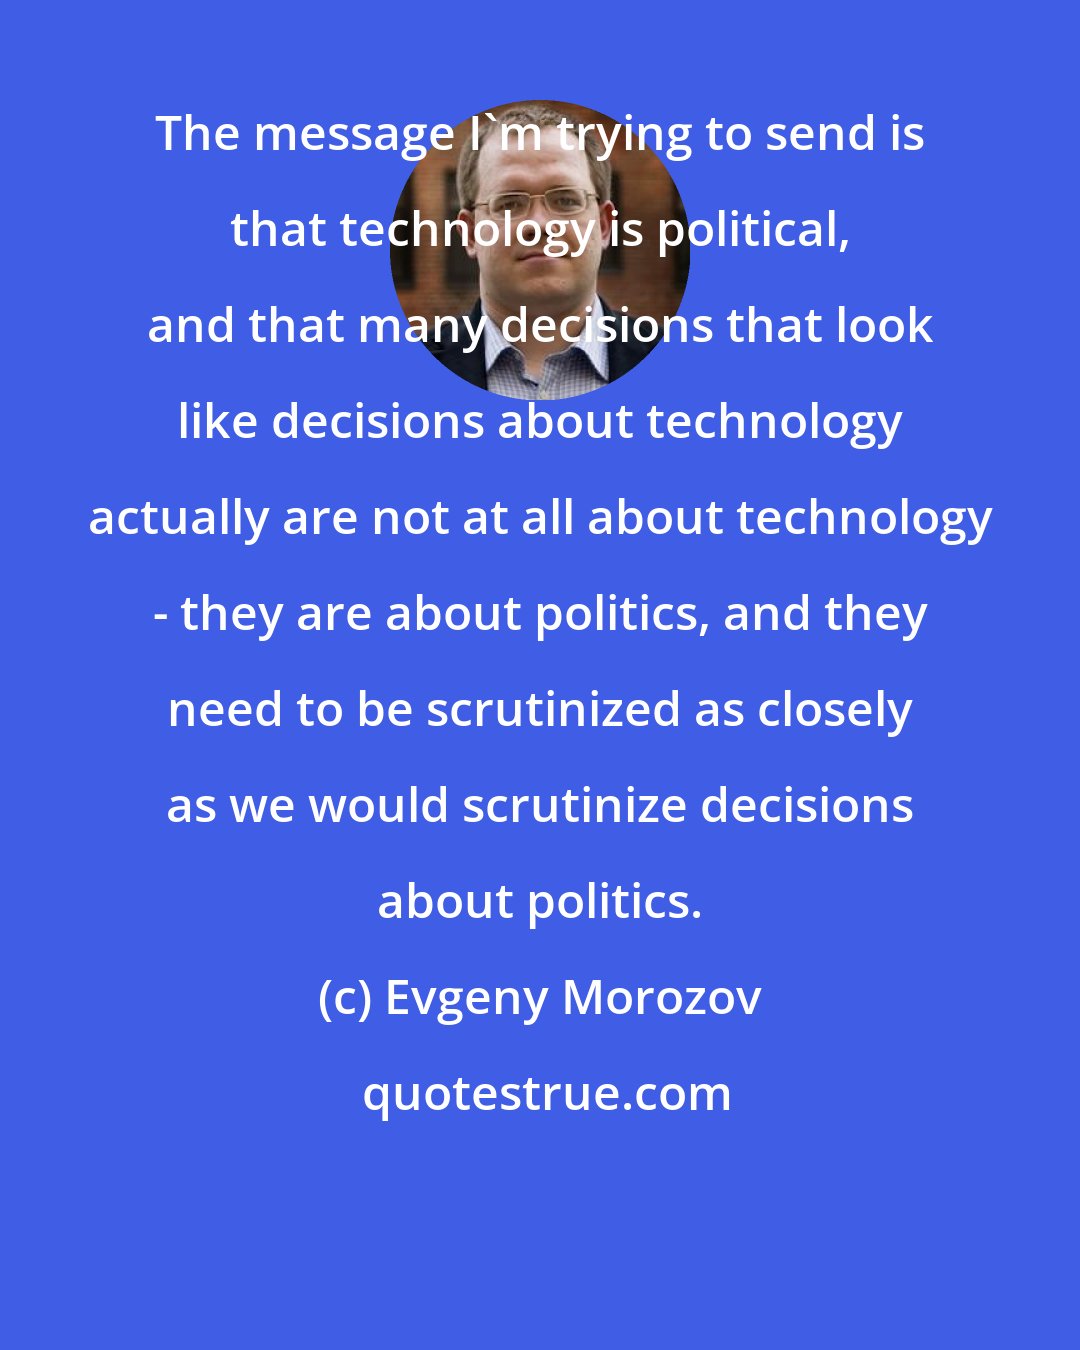 Evgeny Morozov: The message I'm trying to send is that technology is political, and that many decisions that look like decisions about technology actually are not at all about technology - they are about politics, and they need to be scrutinized as closely as we would scrutinize decisions about politics.